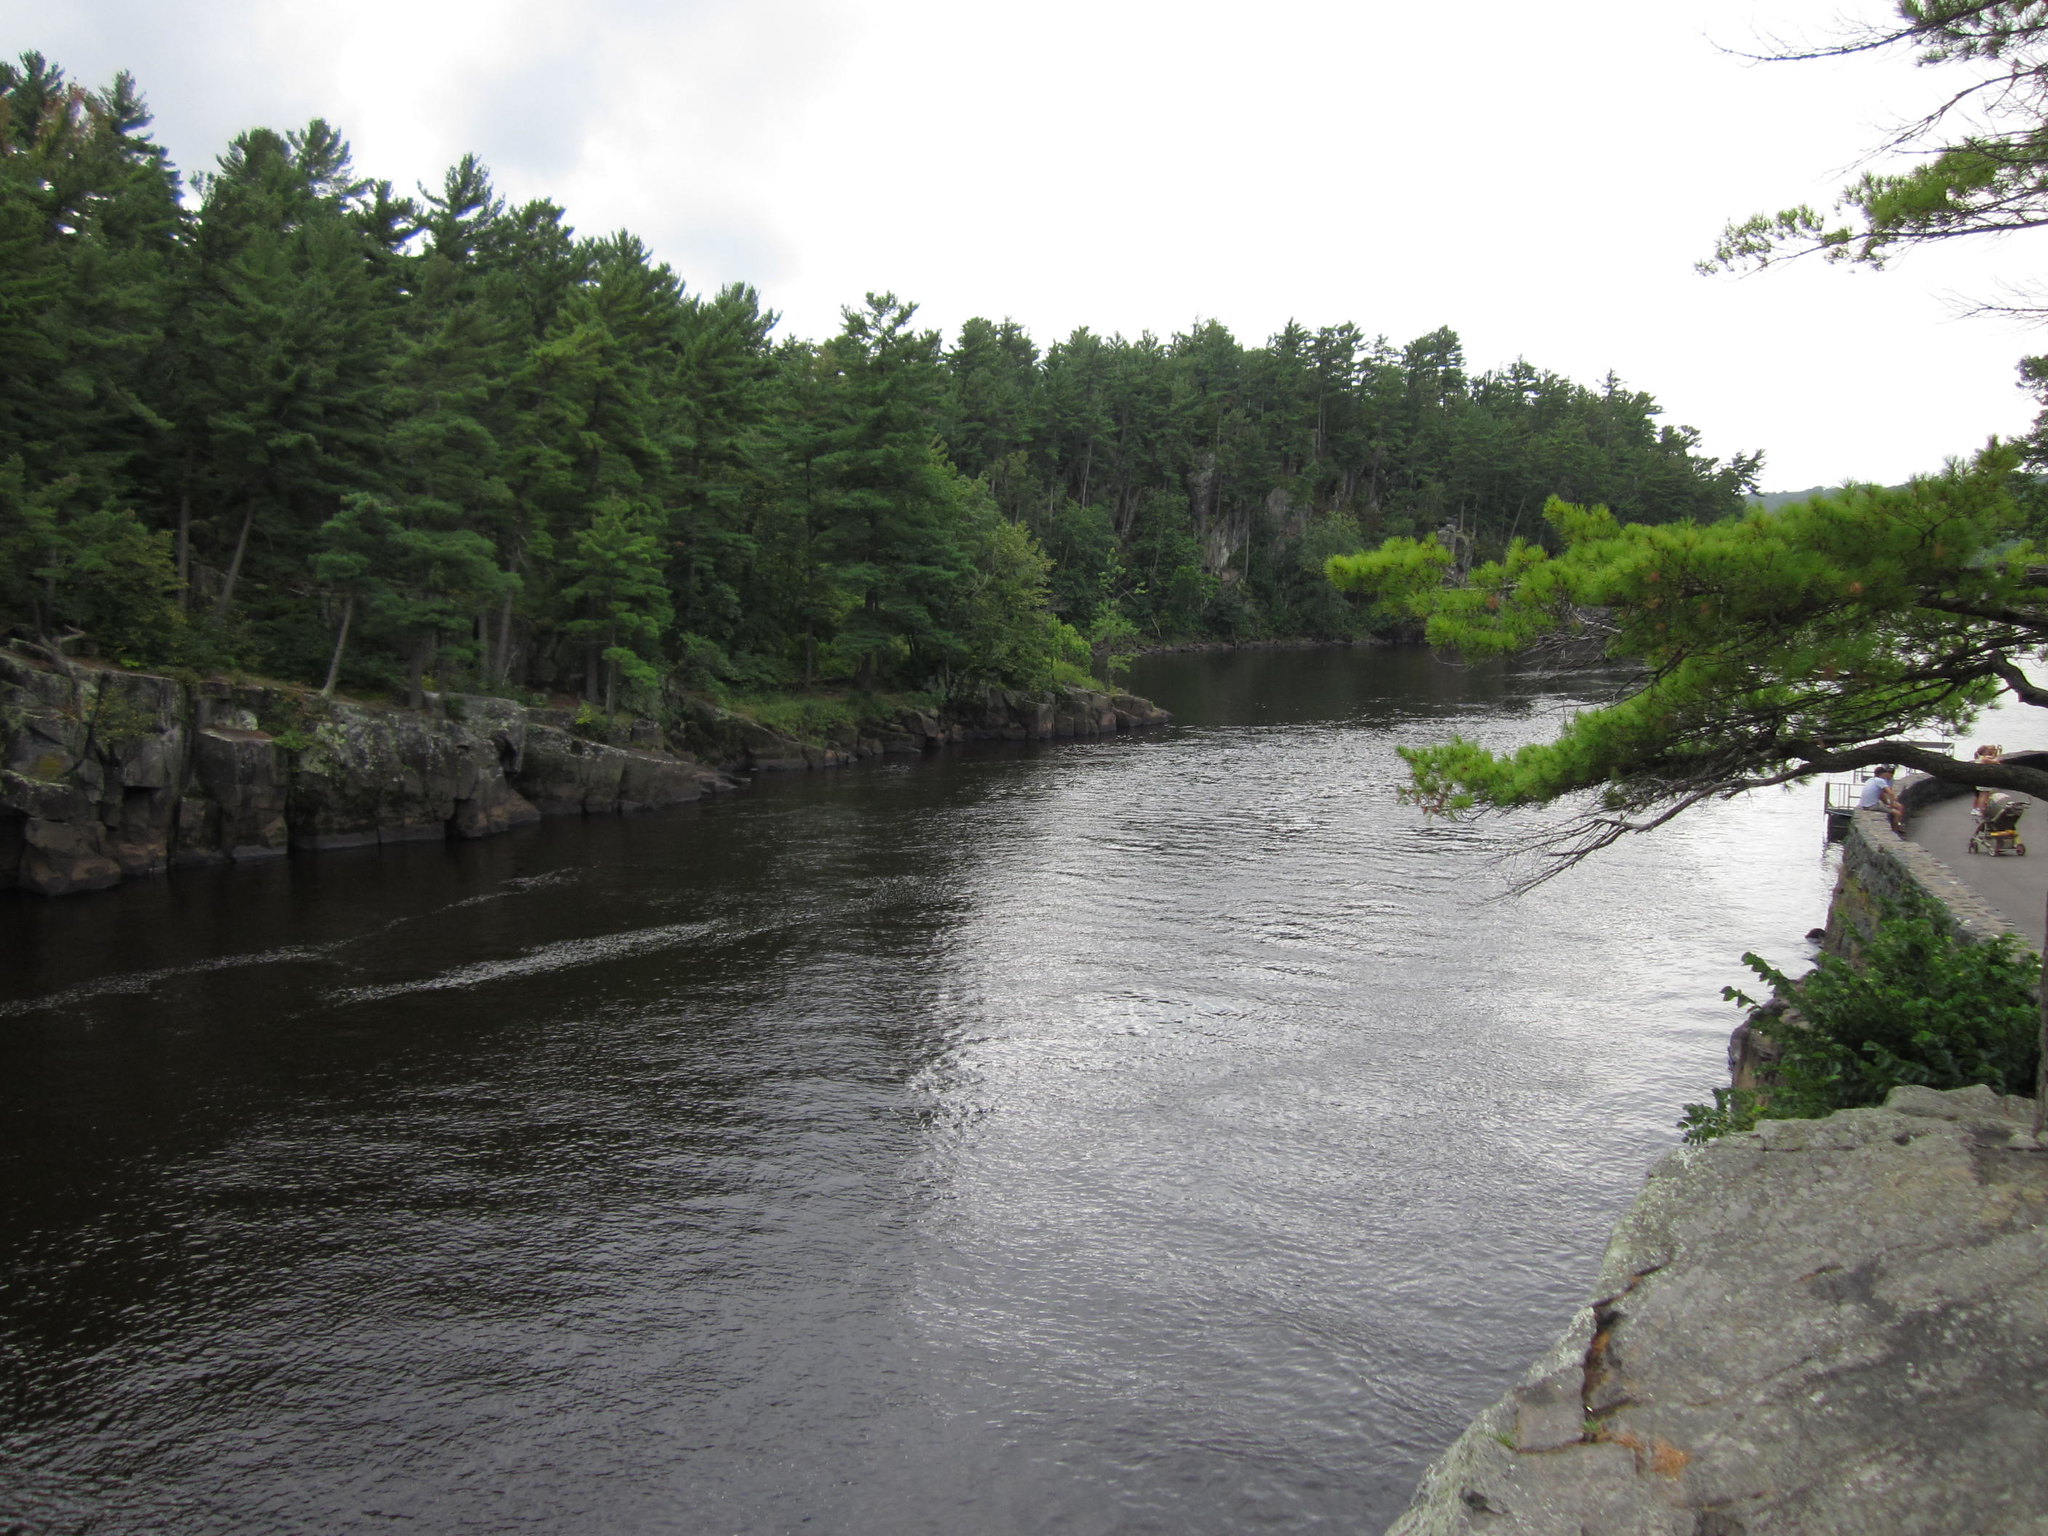 The Dalles of the St. Croix River